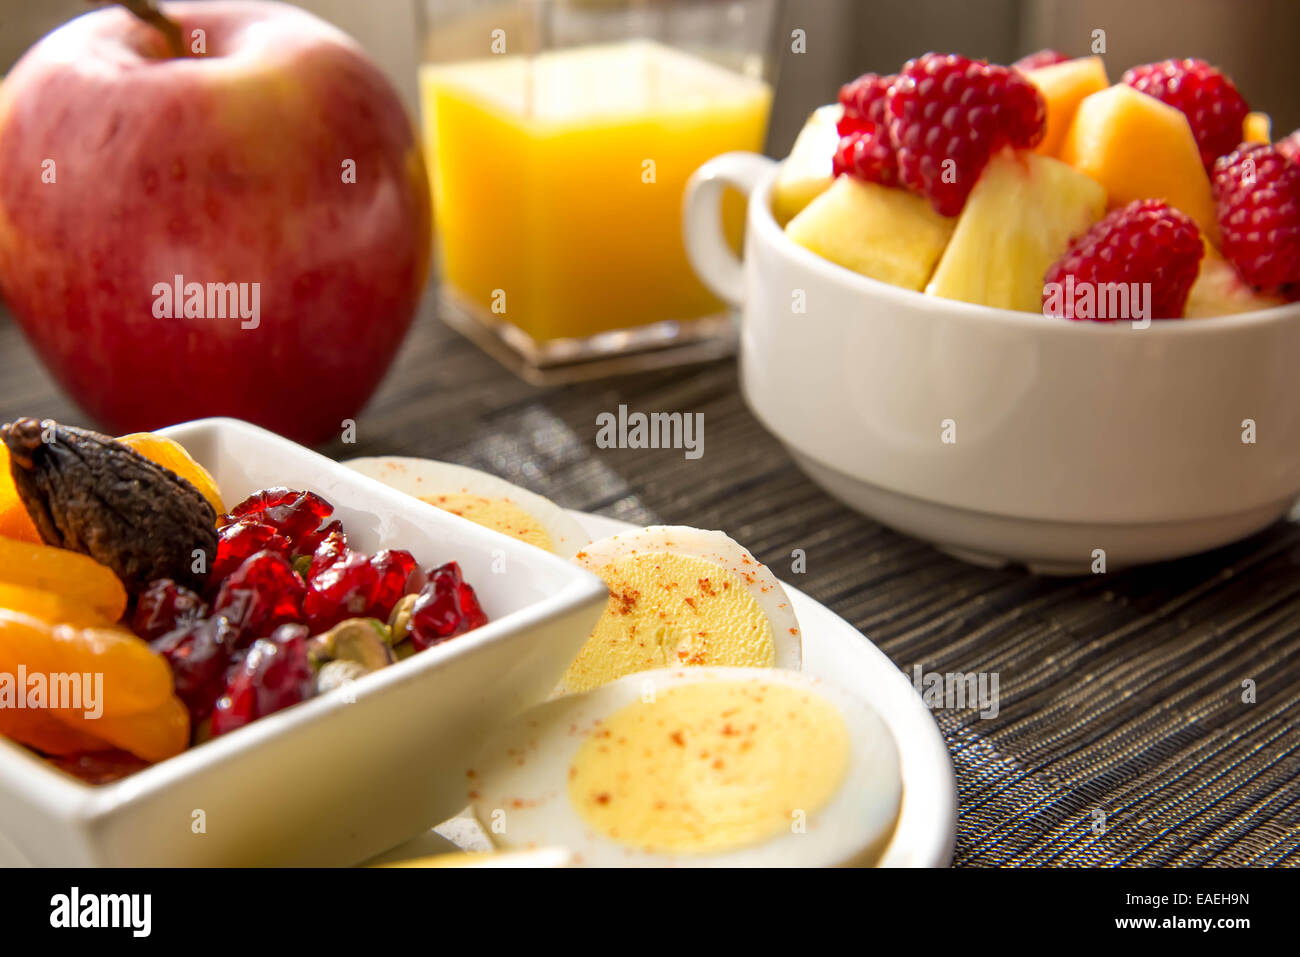 Sliced hard boiled eggs and fruit healthy breakfast Stock Photo